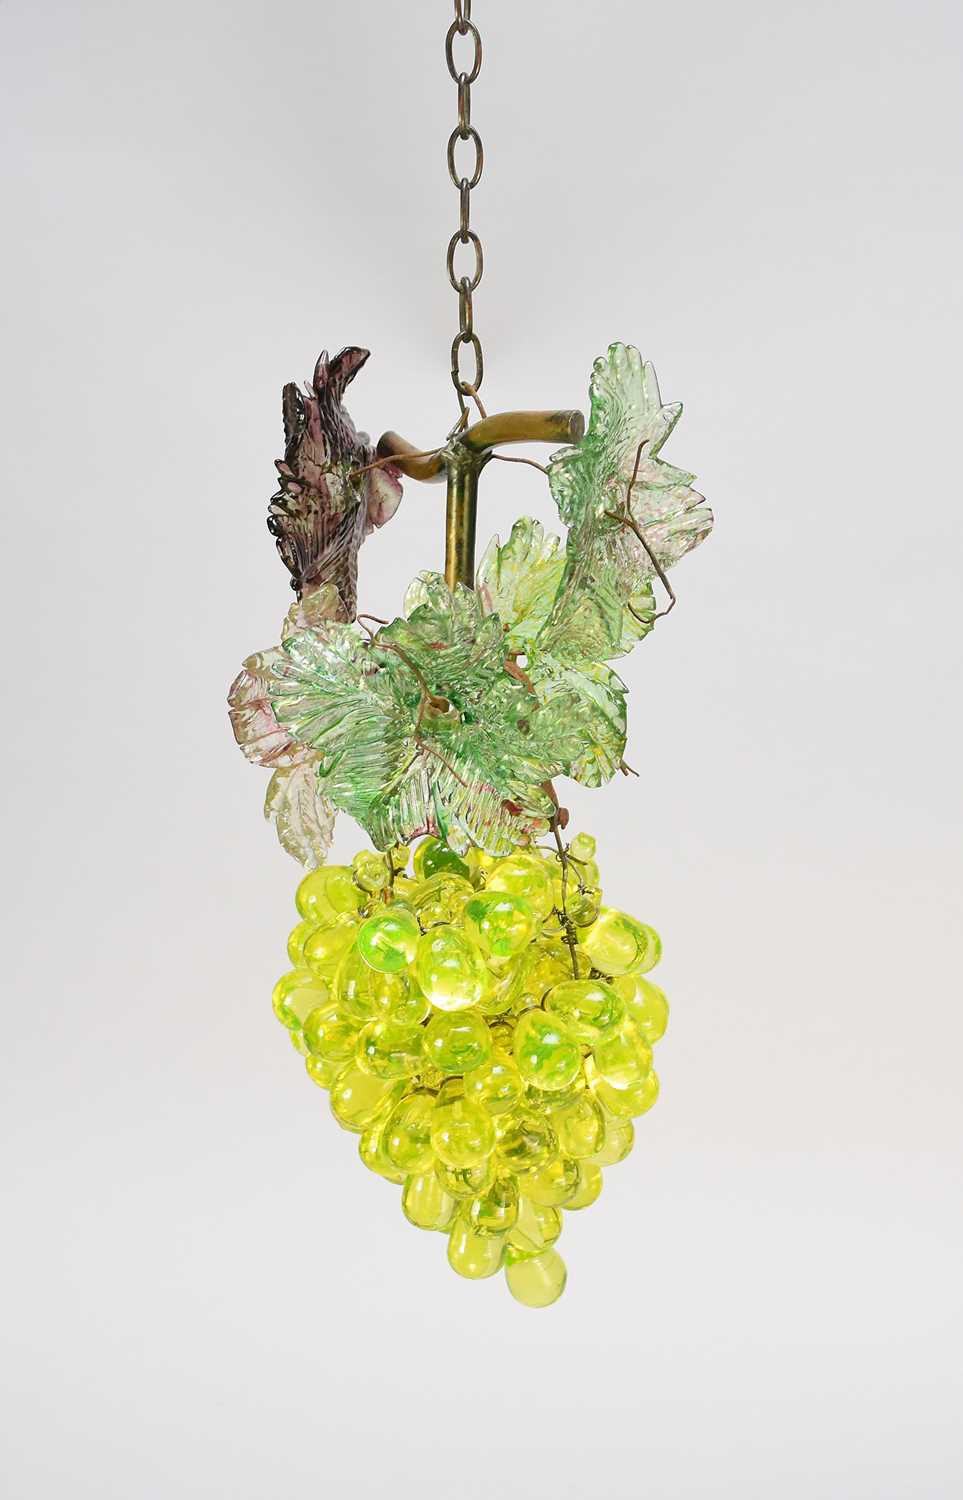 Murano glass ceiling pendant in the form of a bunch of grapes